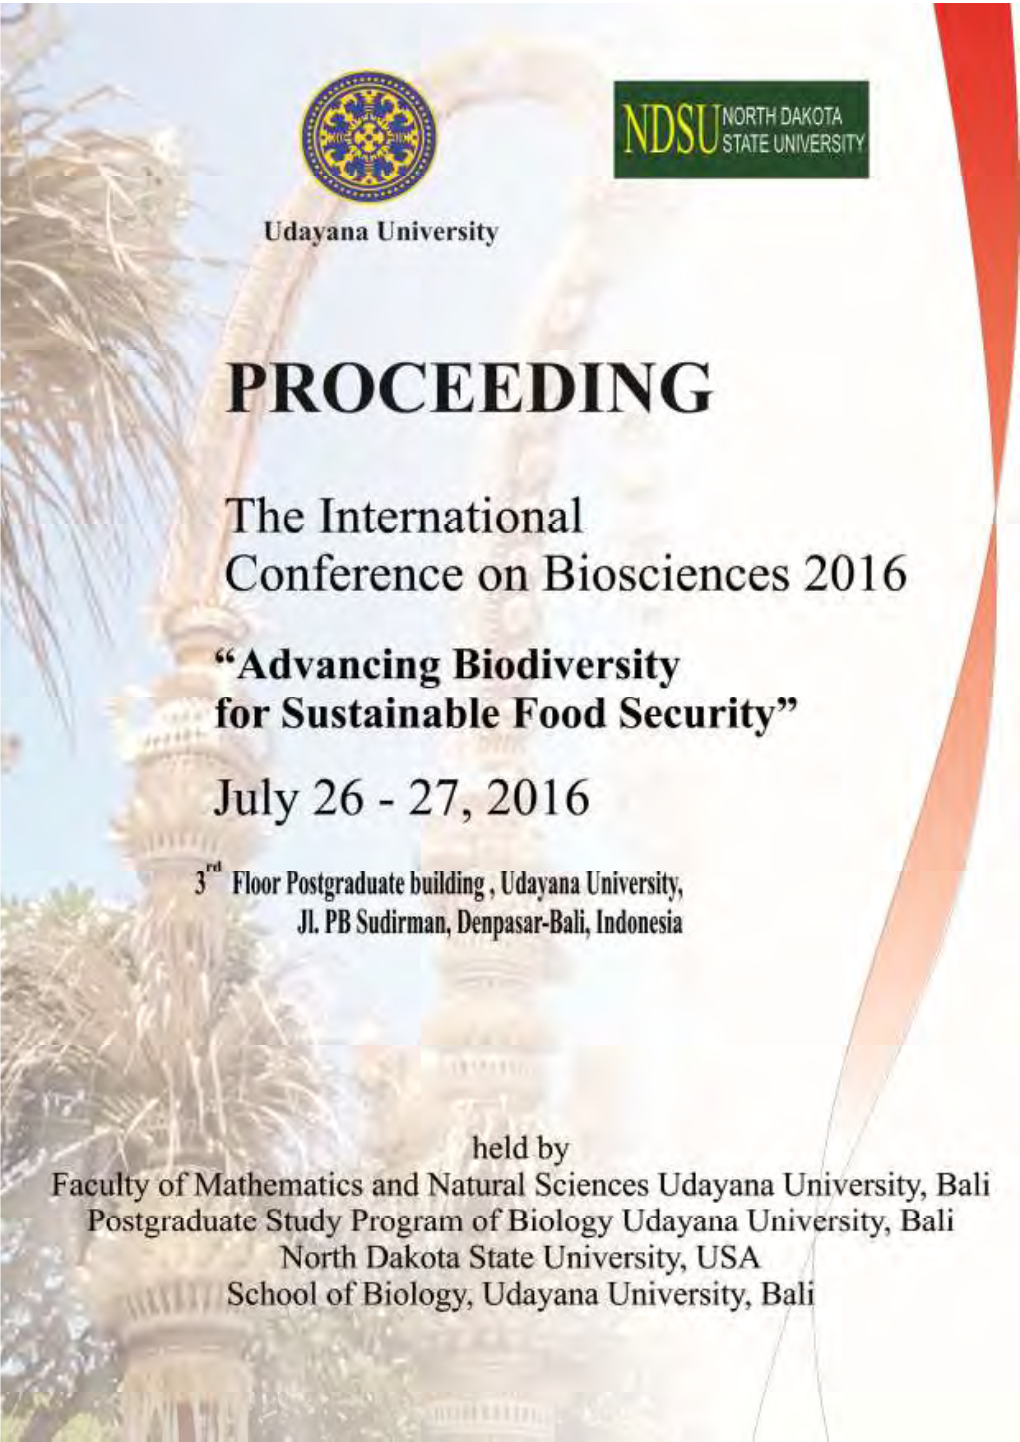 Advancing Biodiversity for Sustainable Food Security”